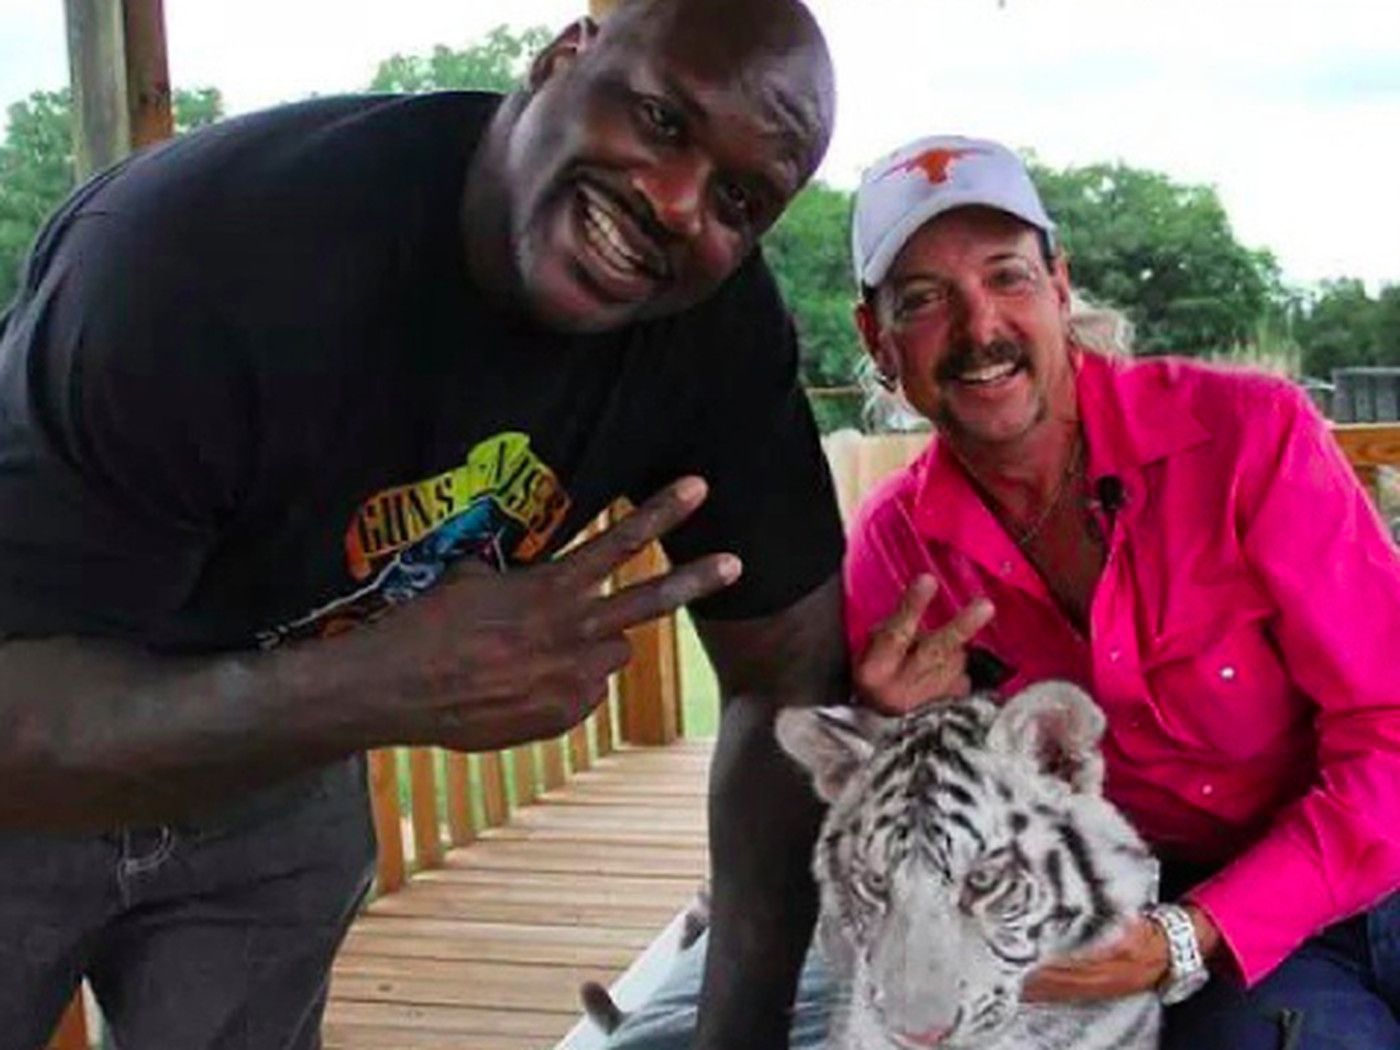 Tiger King': How Shaq ended up on the Netflix show